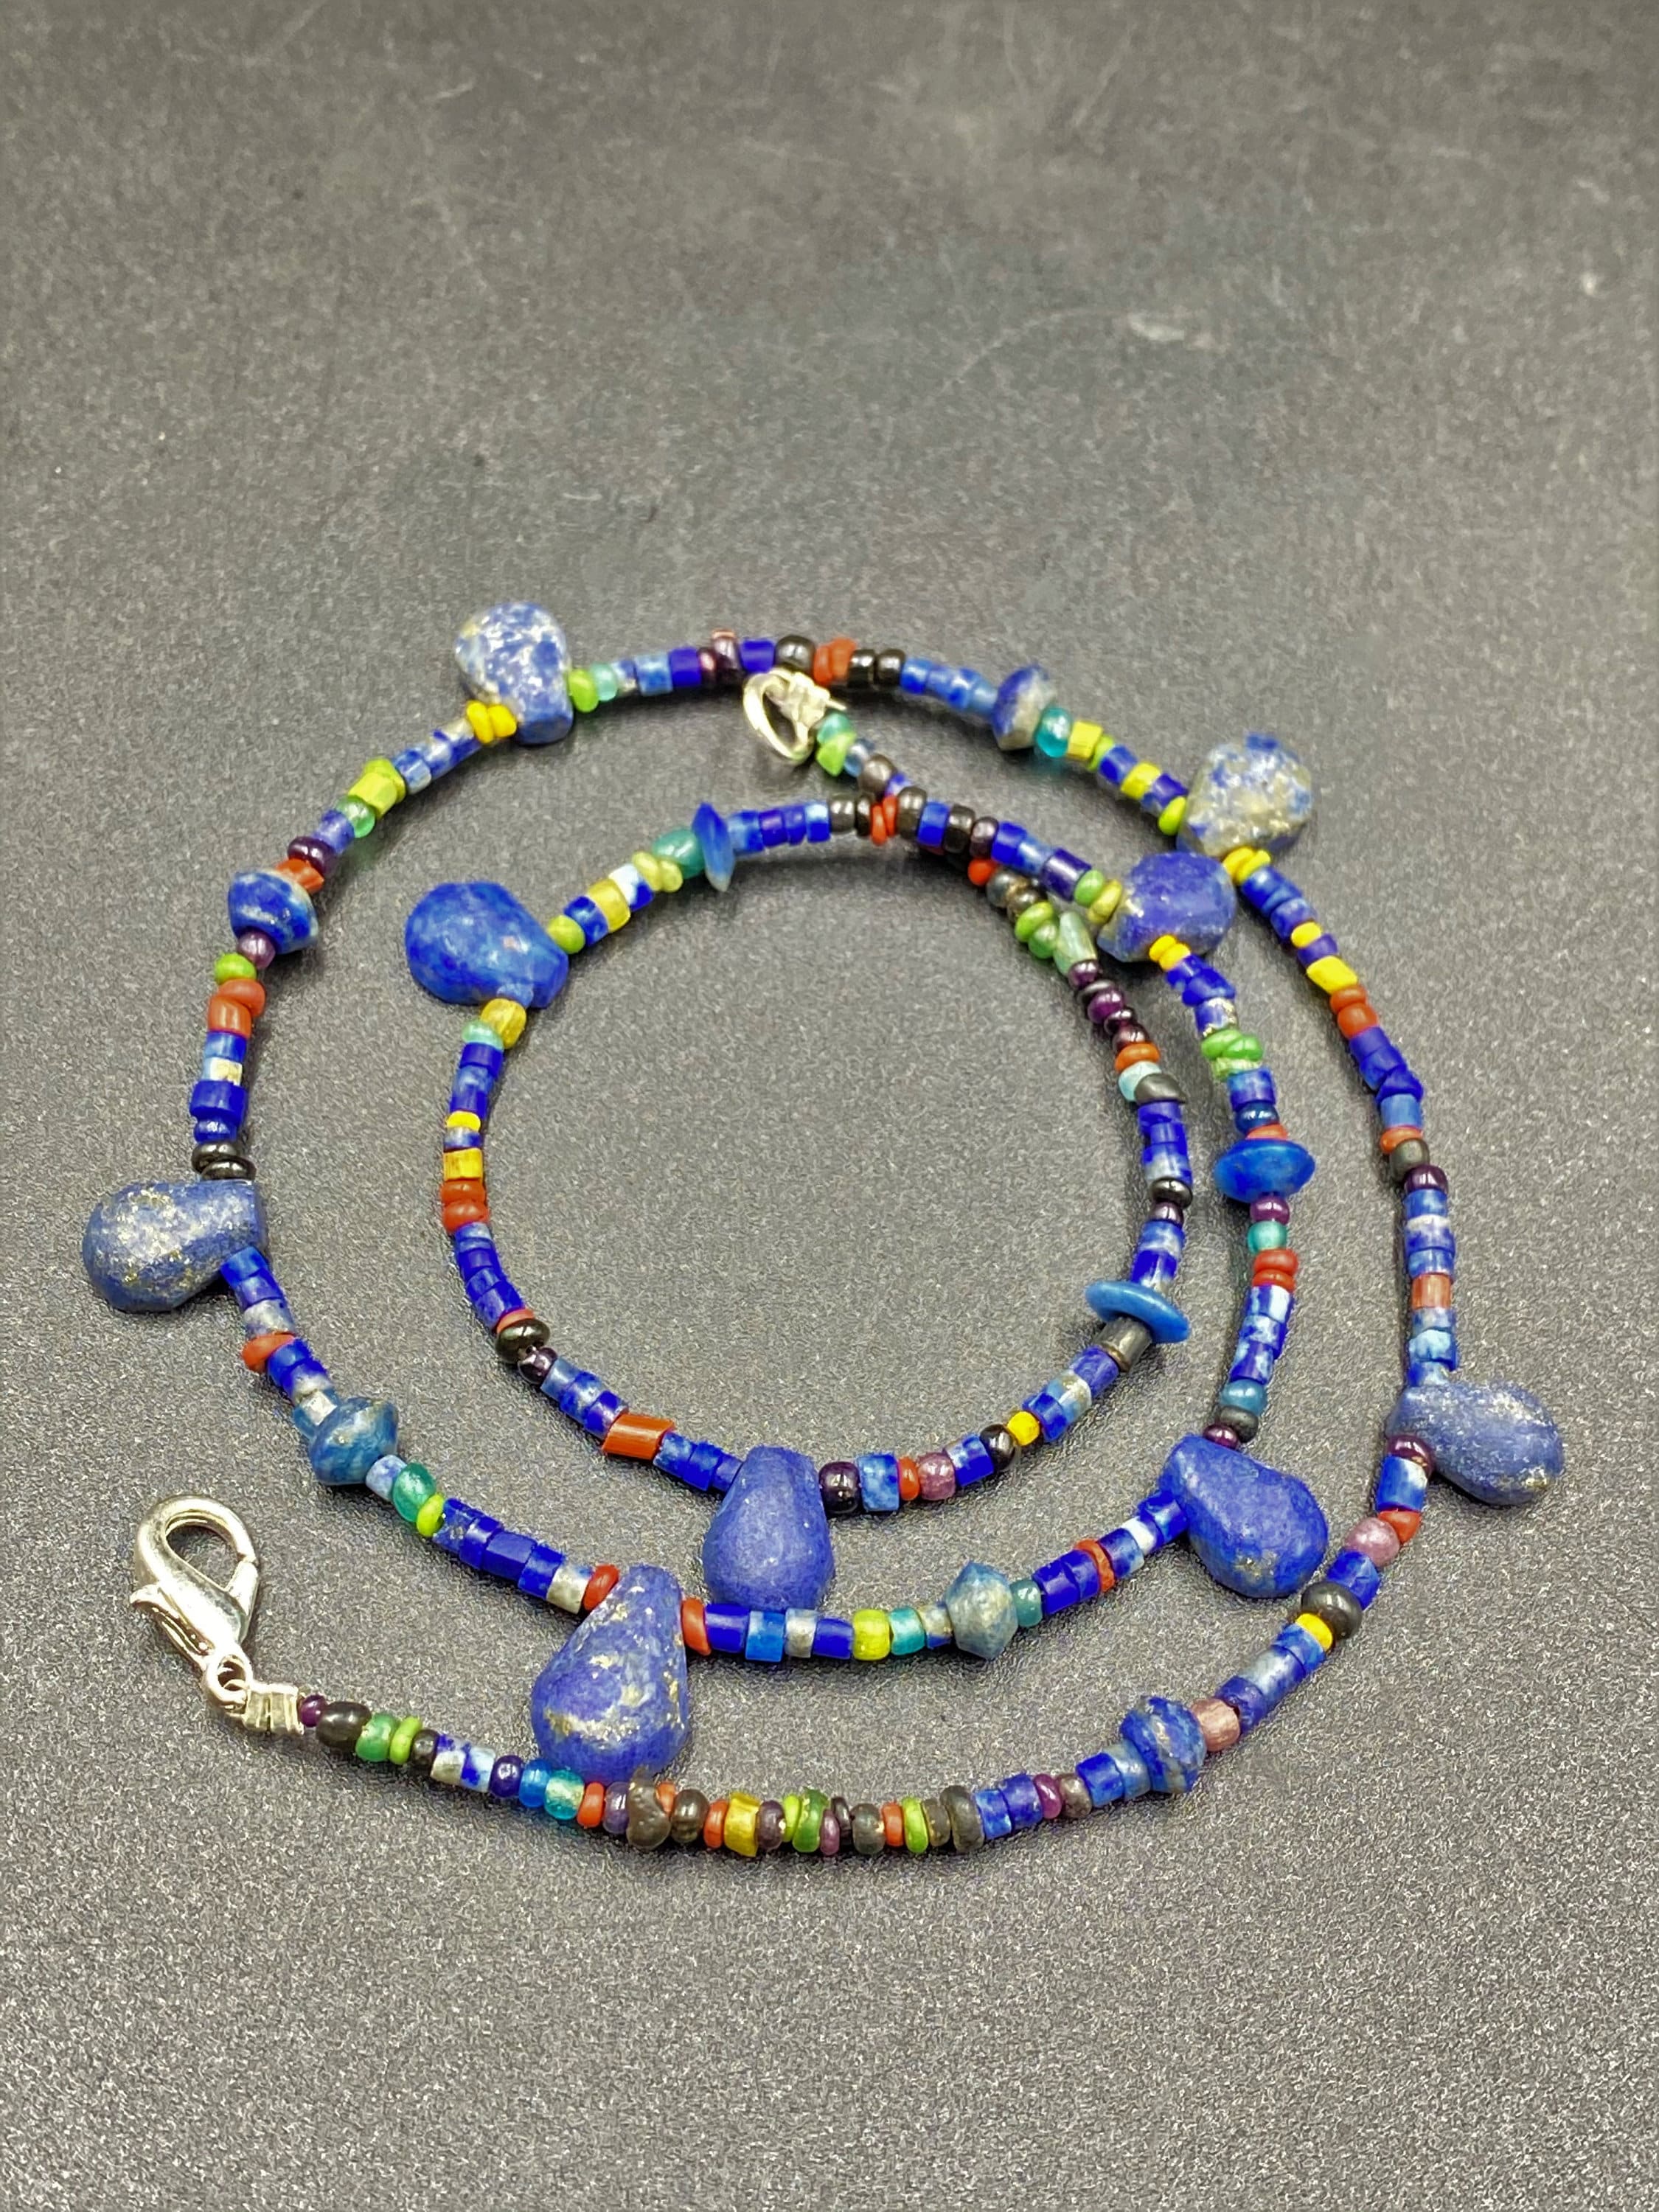 Old Trade Antique Jewelry of Glass lapis Beads Necklace From - Etsy